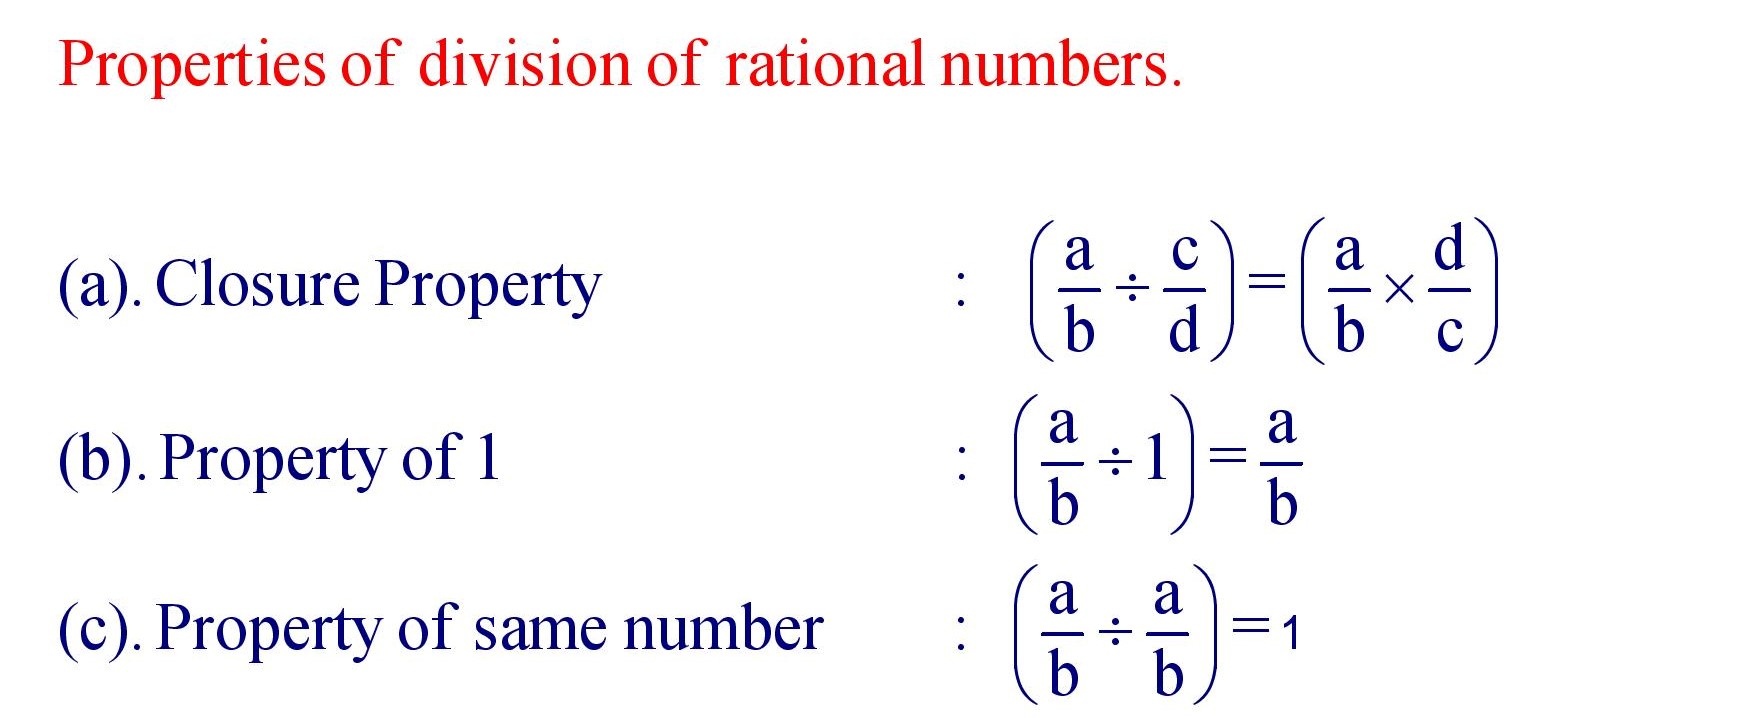 Properties of Division of Rational Numbers